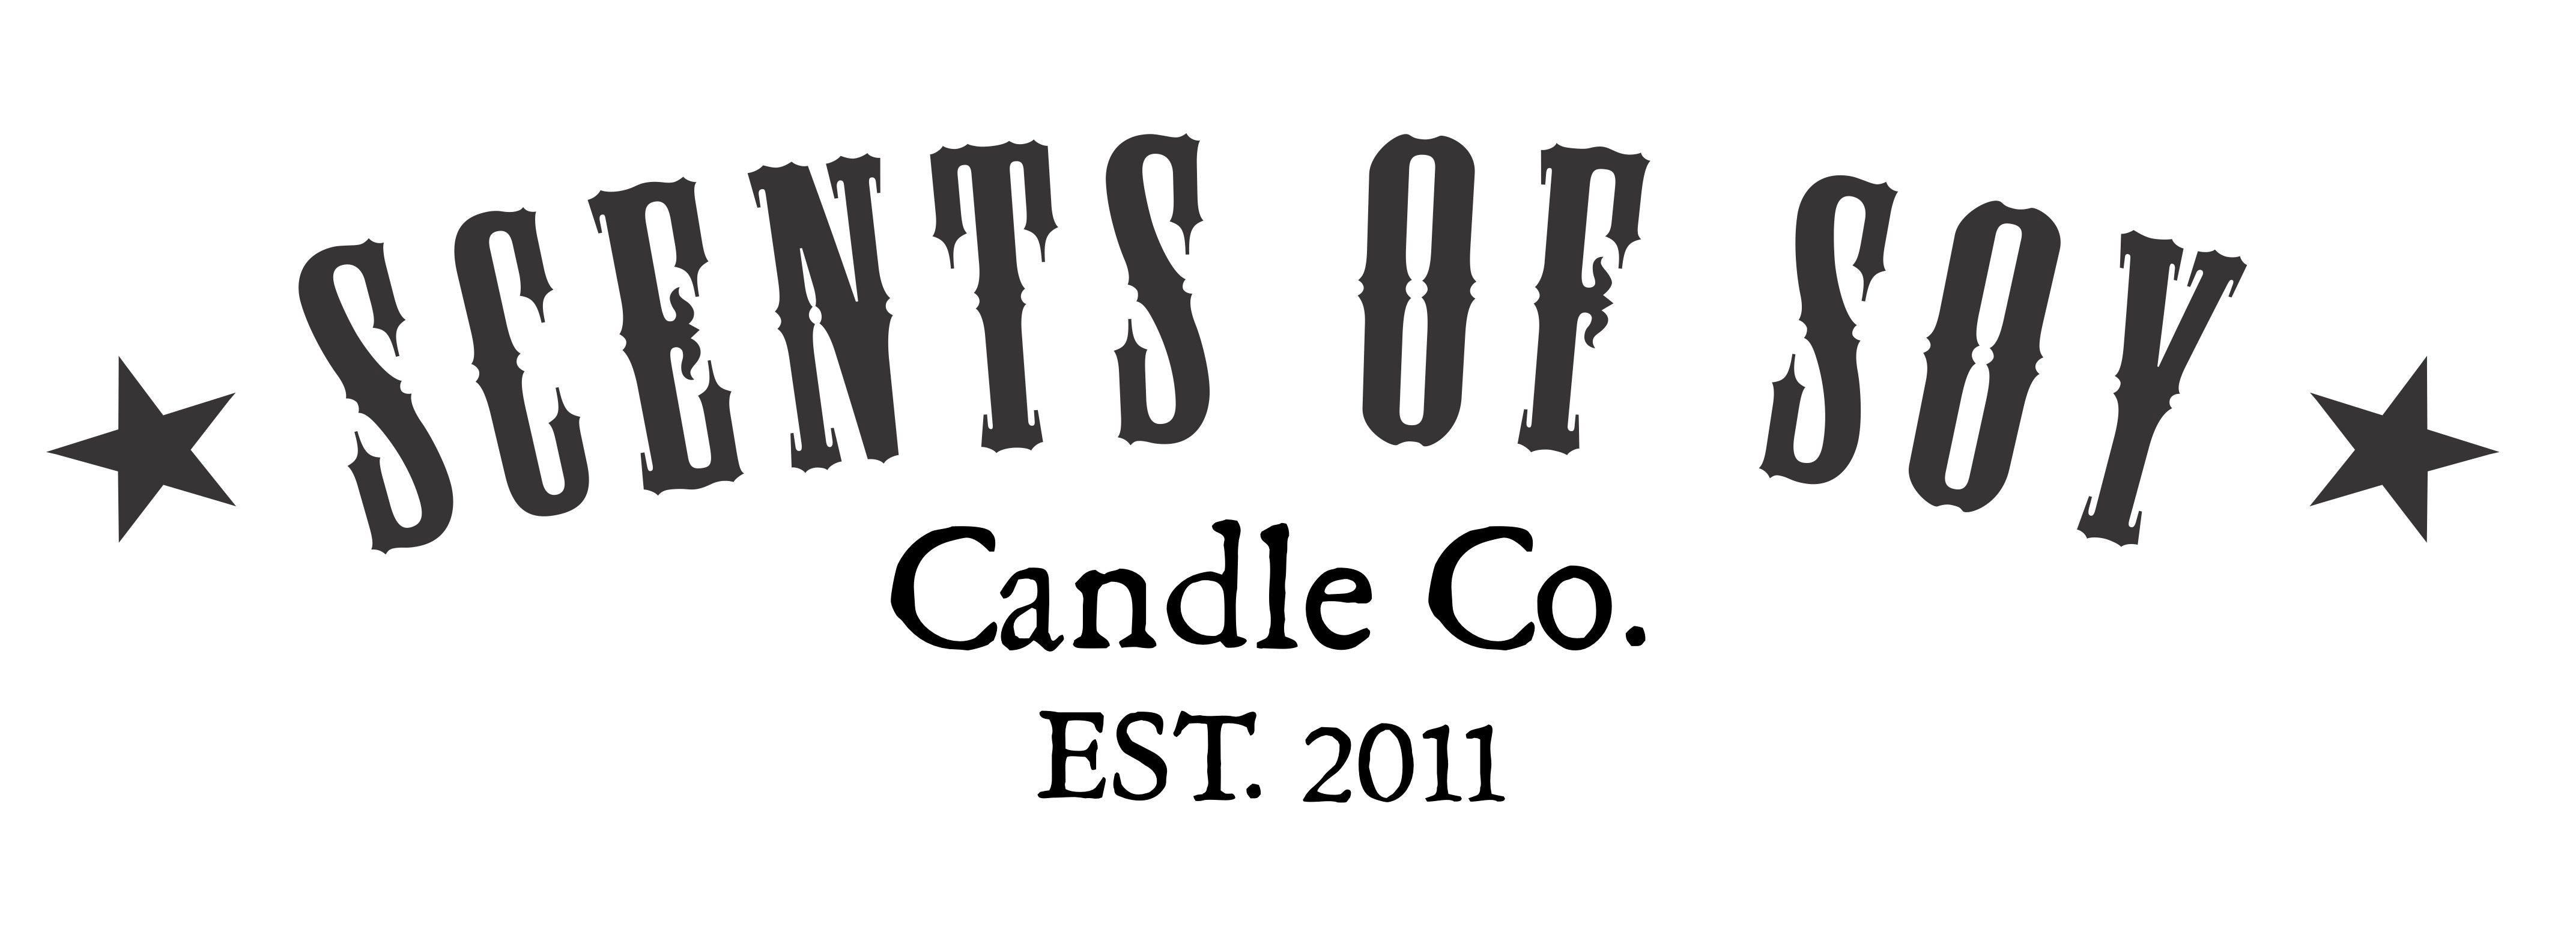 Log Cabin Rustic Wax Melt – Scents of Soy Candle Co.